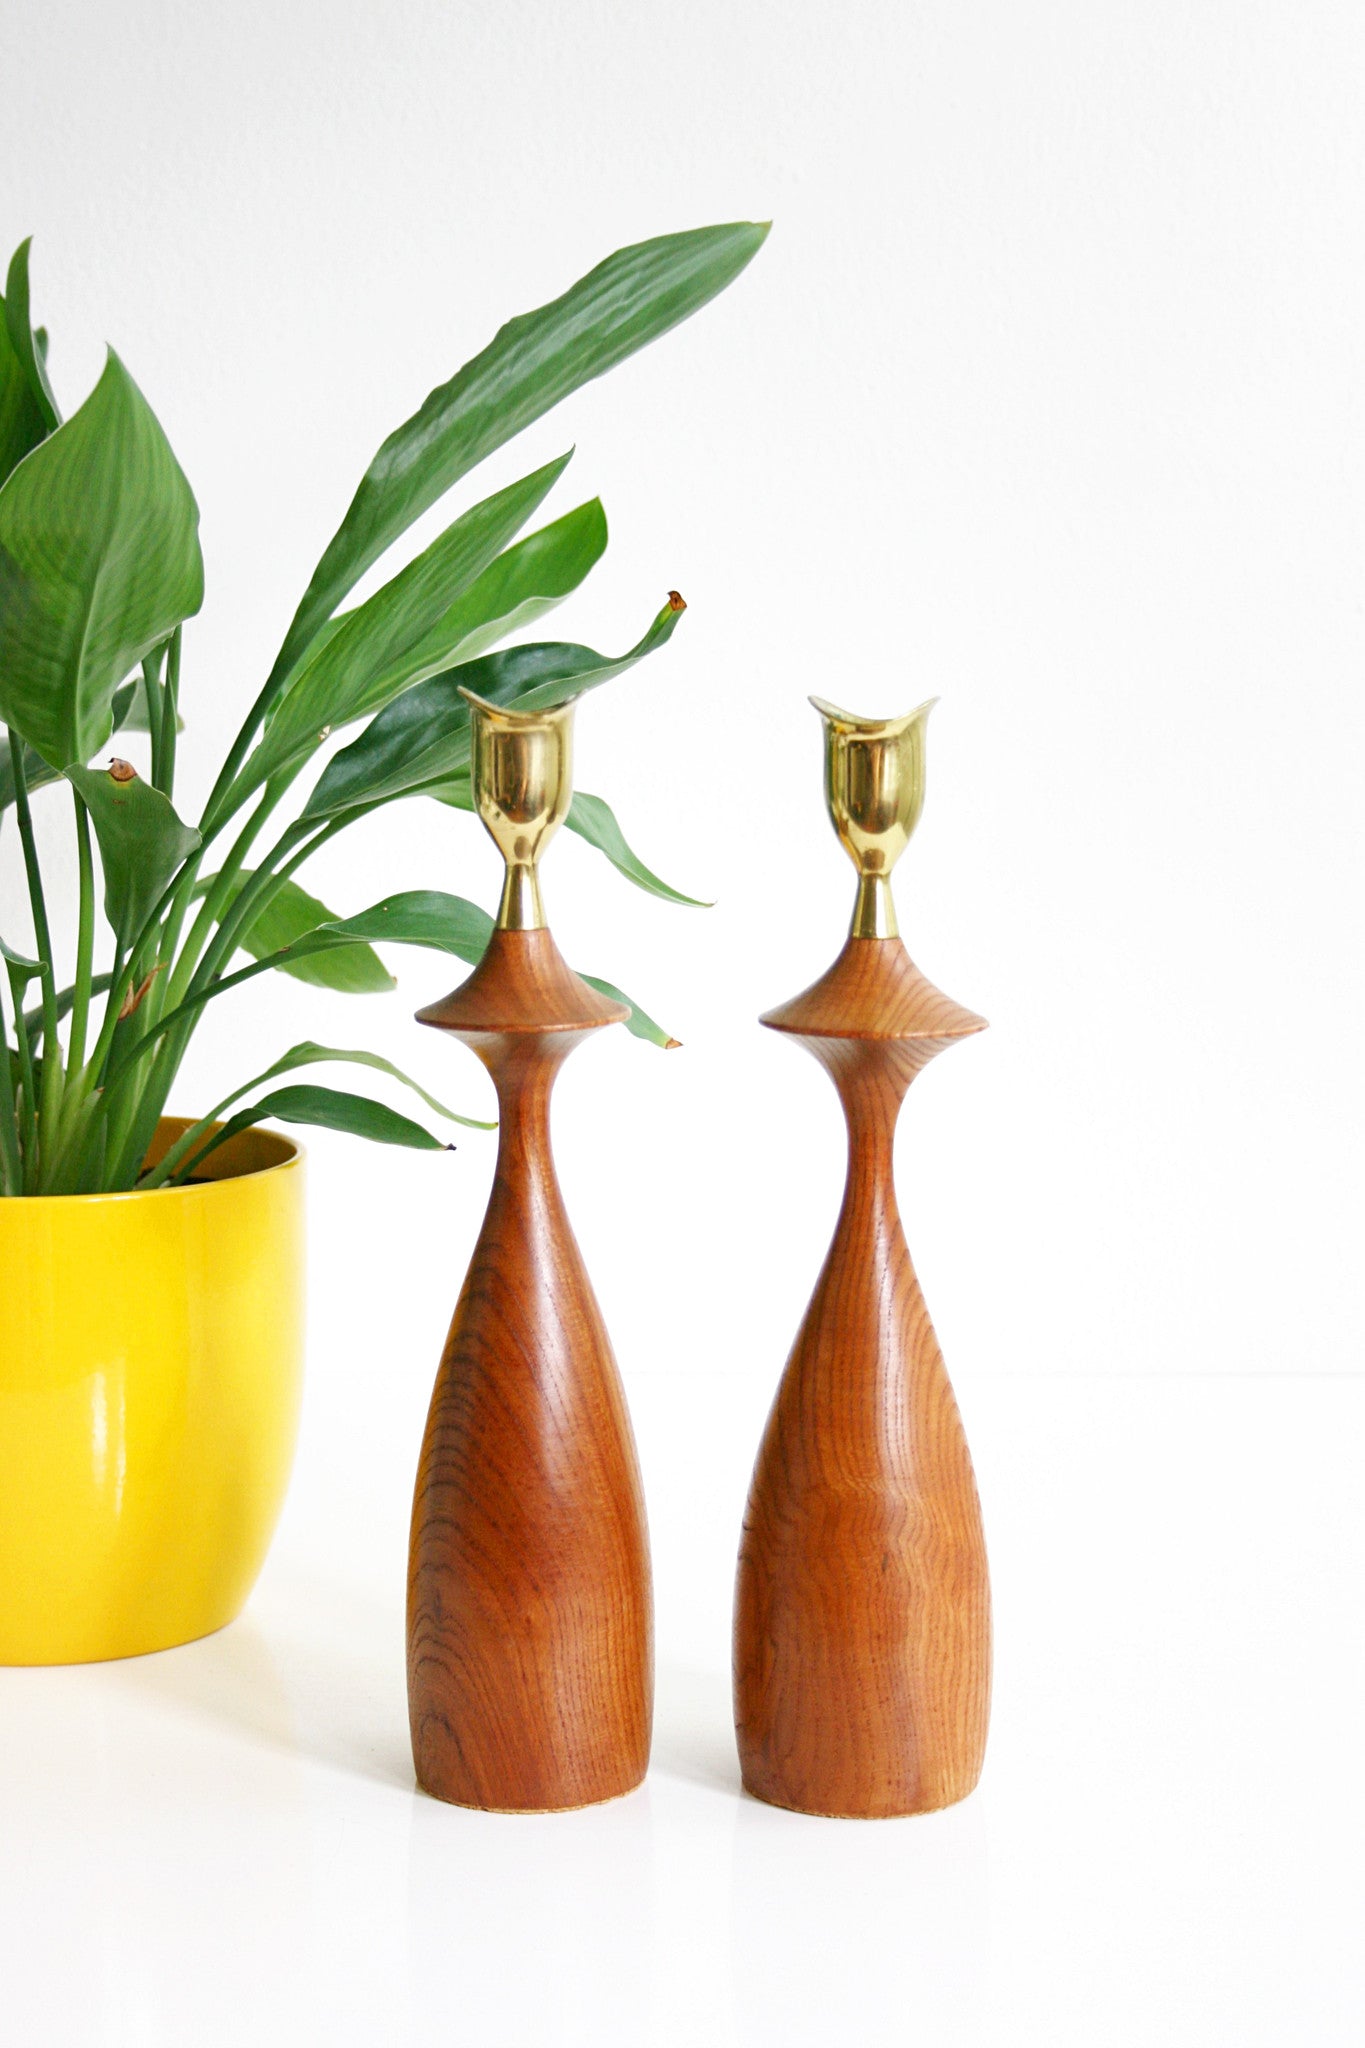 SOLD - Mid Century Modern Wood and Brass Candlesticks / Danish Modern Candle Holders